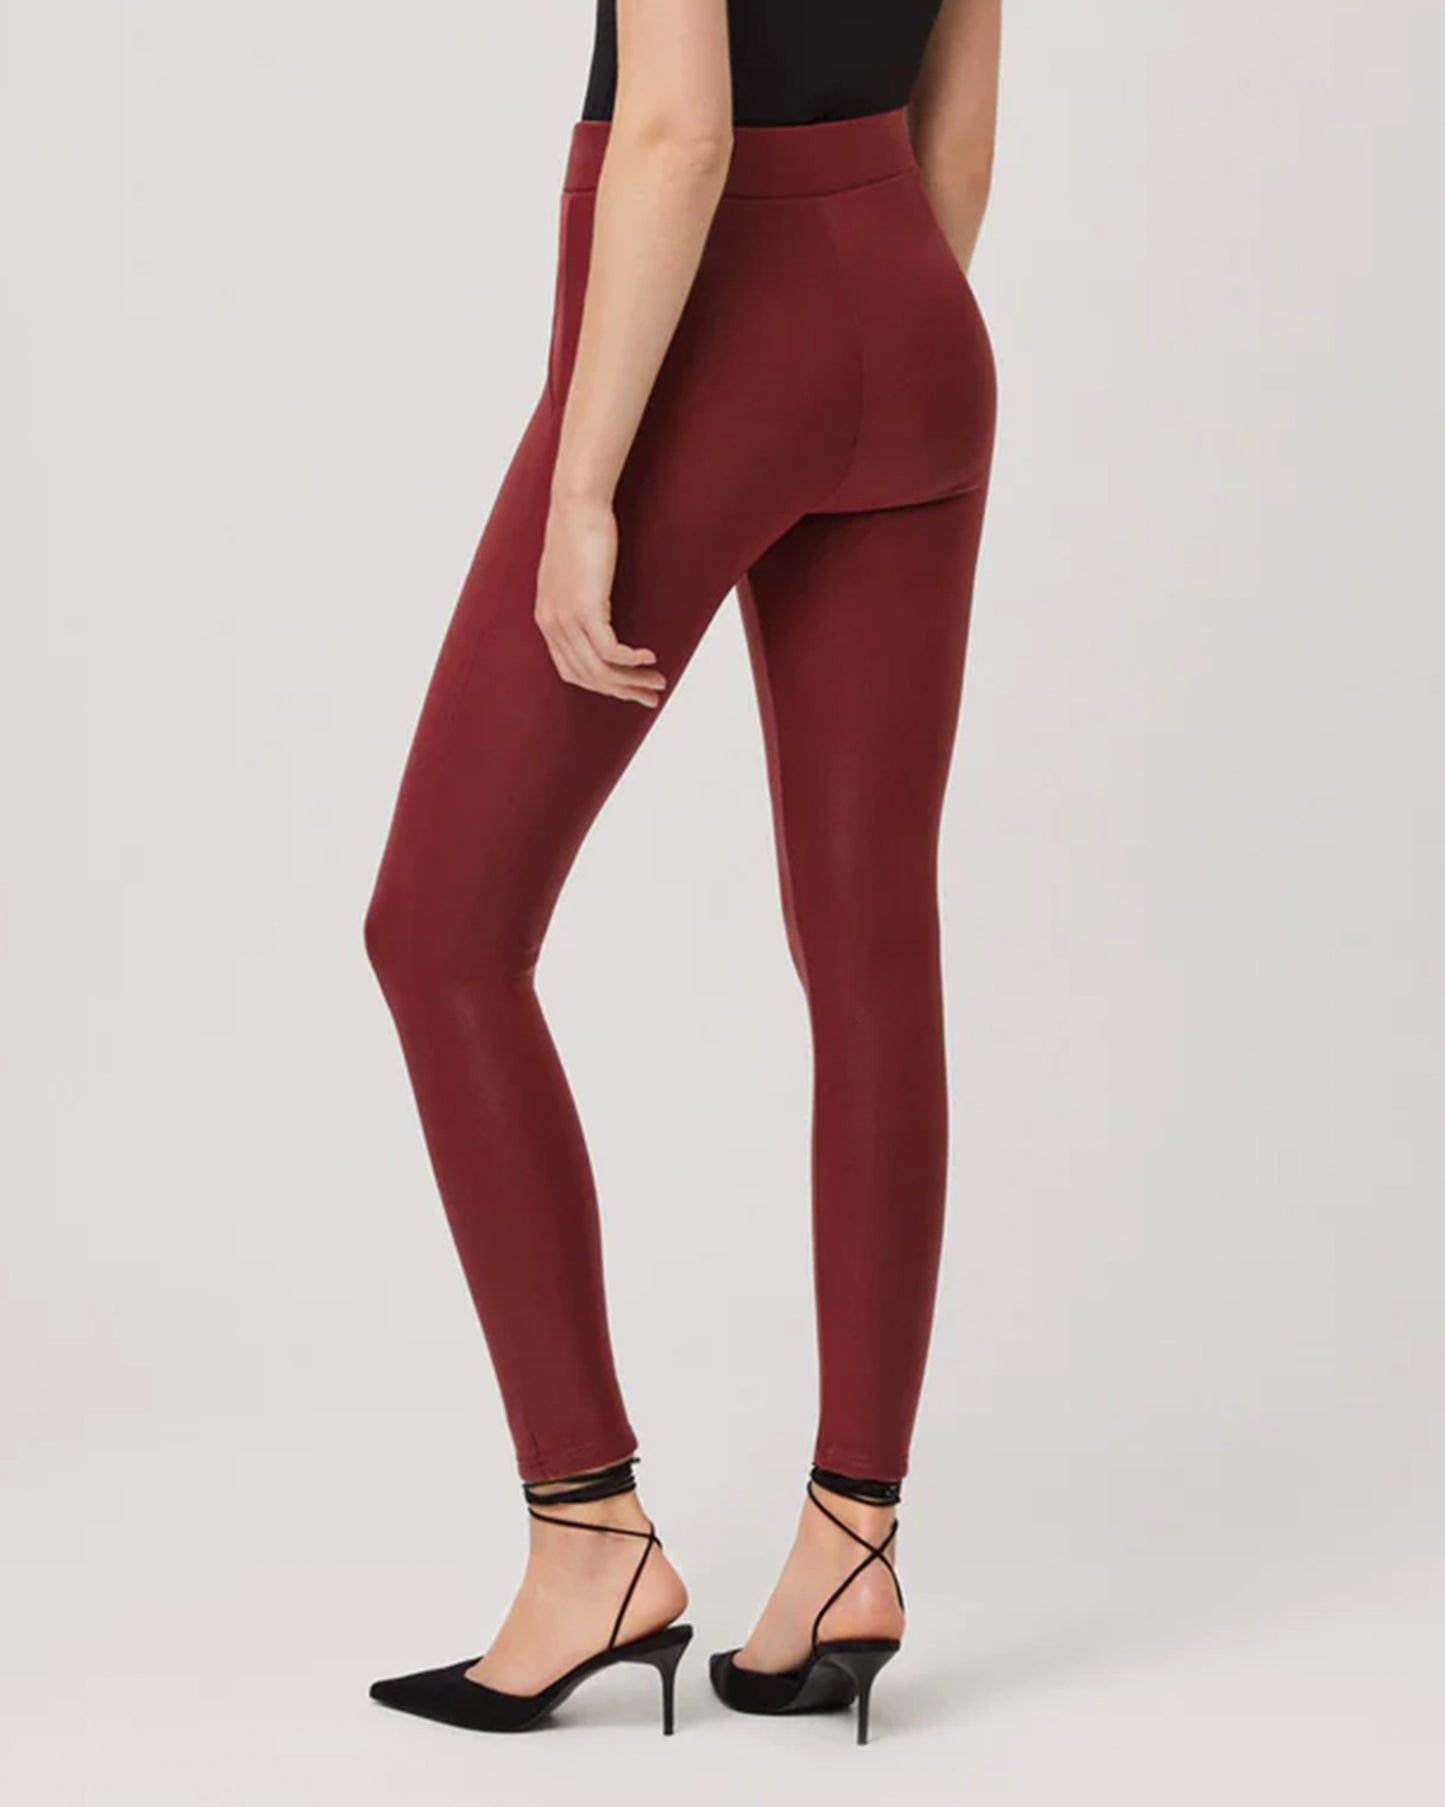 Ysabel Mora 70166 Waxed Thermal Leggings - High rise wine / maroon trouser leggings with waxed effect finish, warm fleece lining, faux front pockets with covered buttons and deep elasticated waistband.